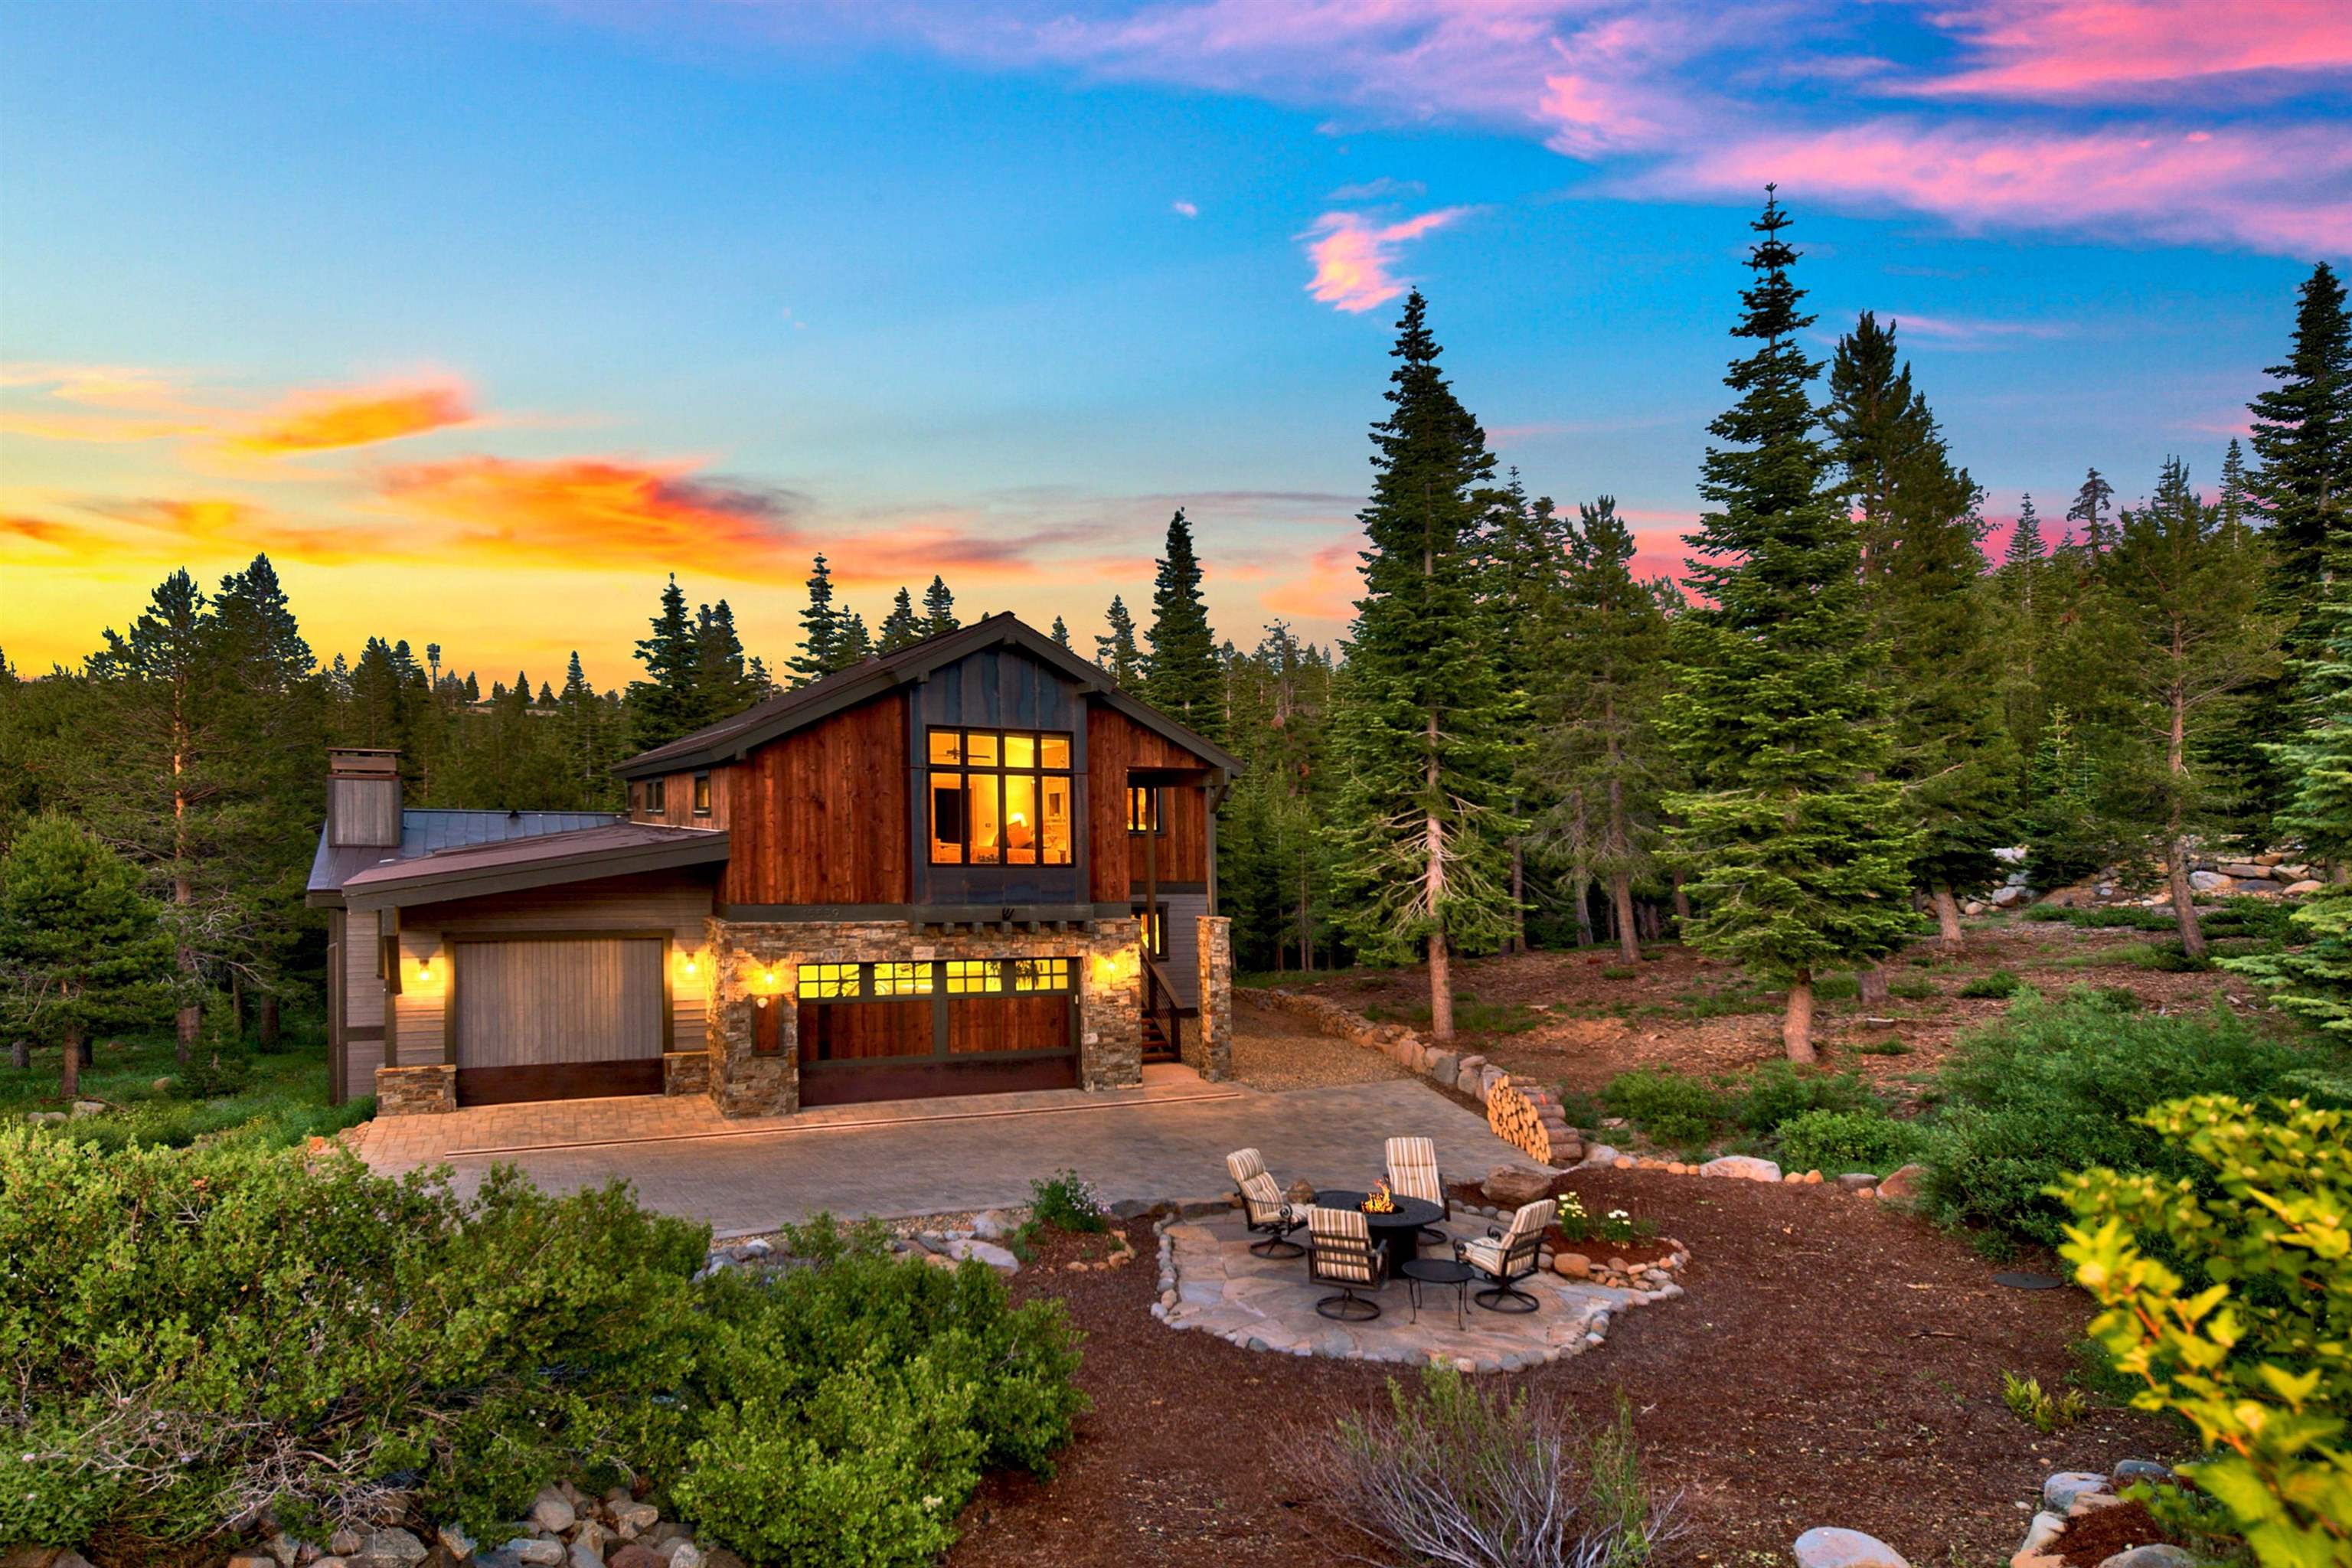 Image for 15559 Skislope Way, Truckee, CA 96161-0000